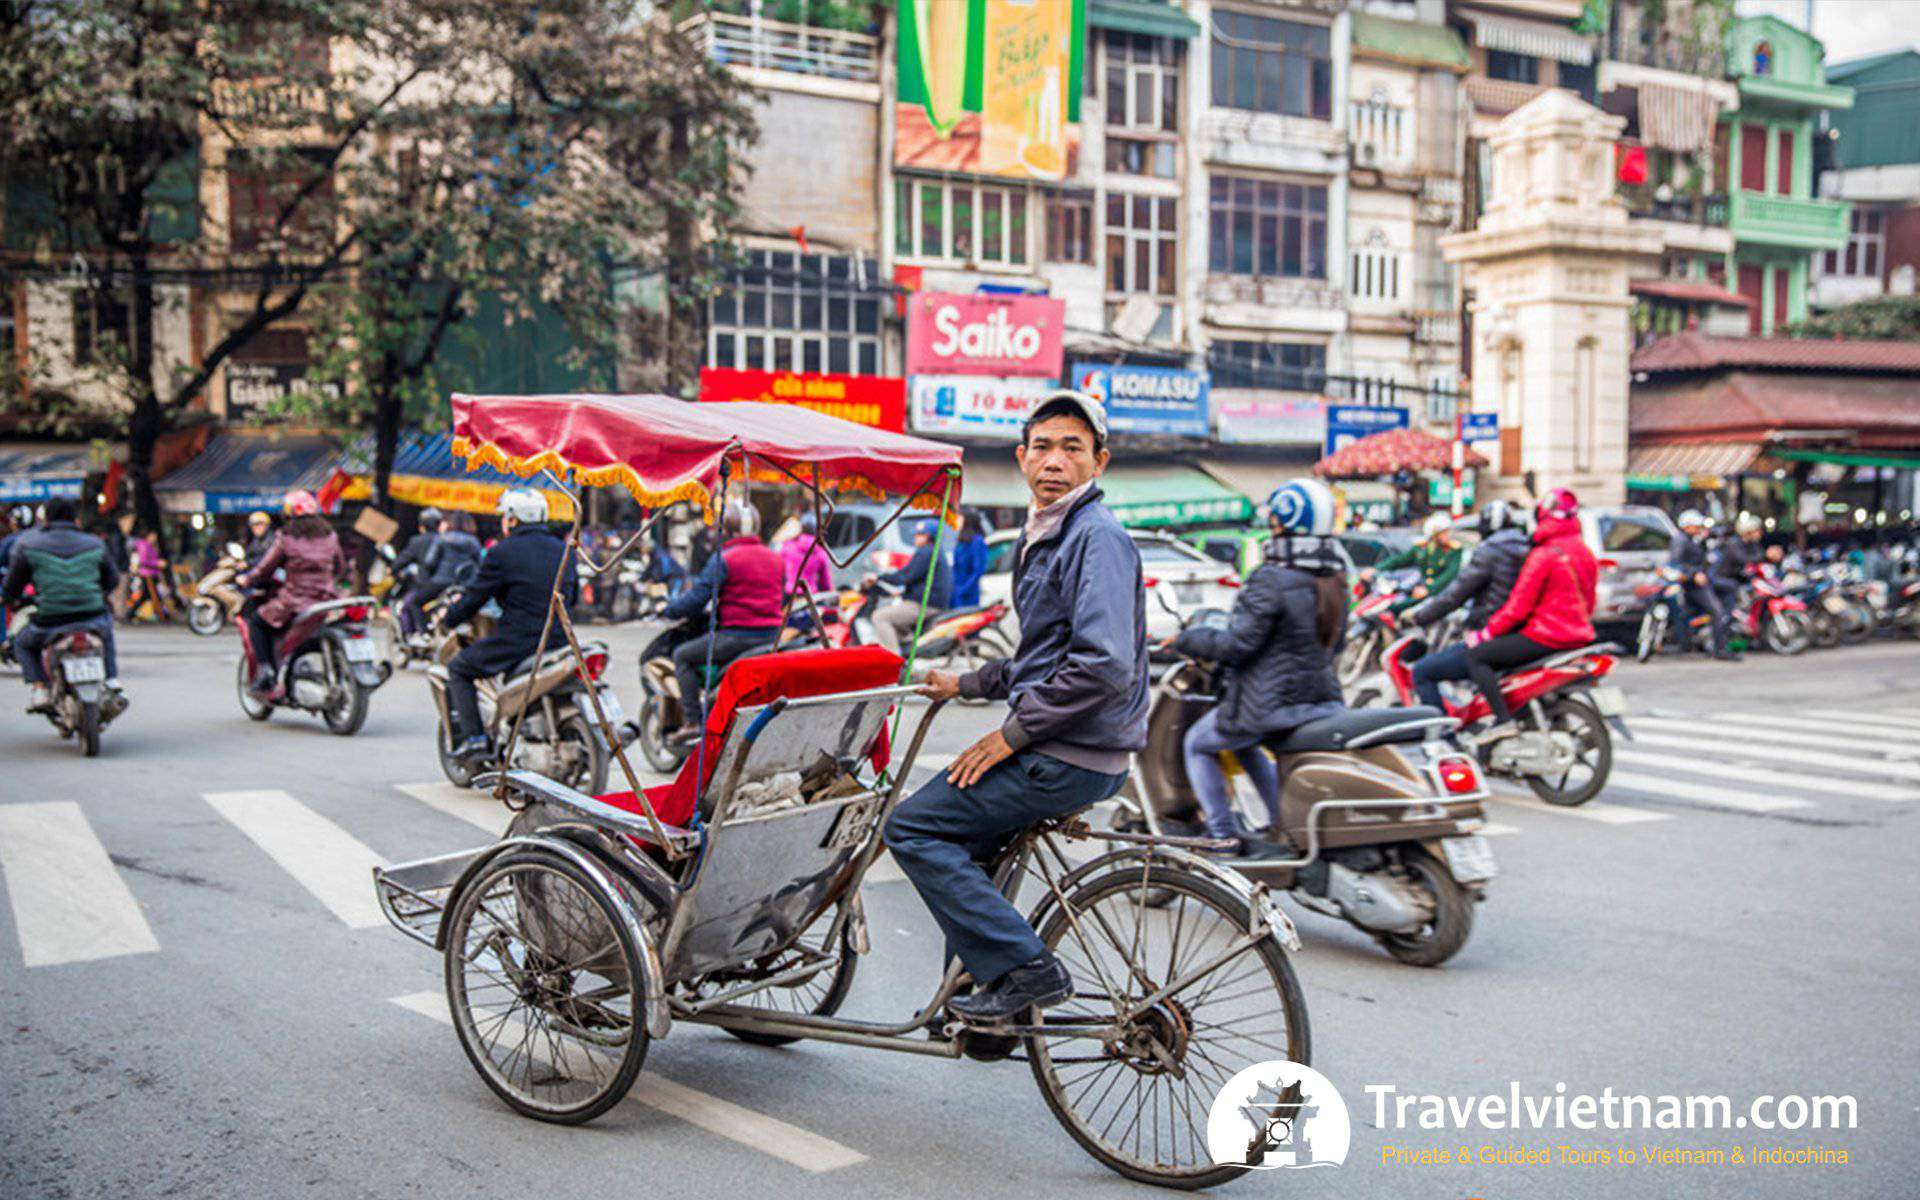 What is cyclo ( Xich Lo) in Vietnam?